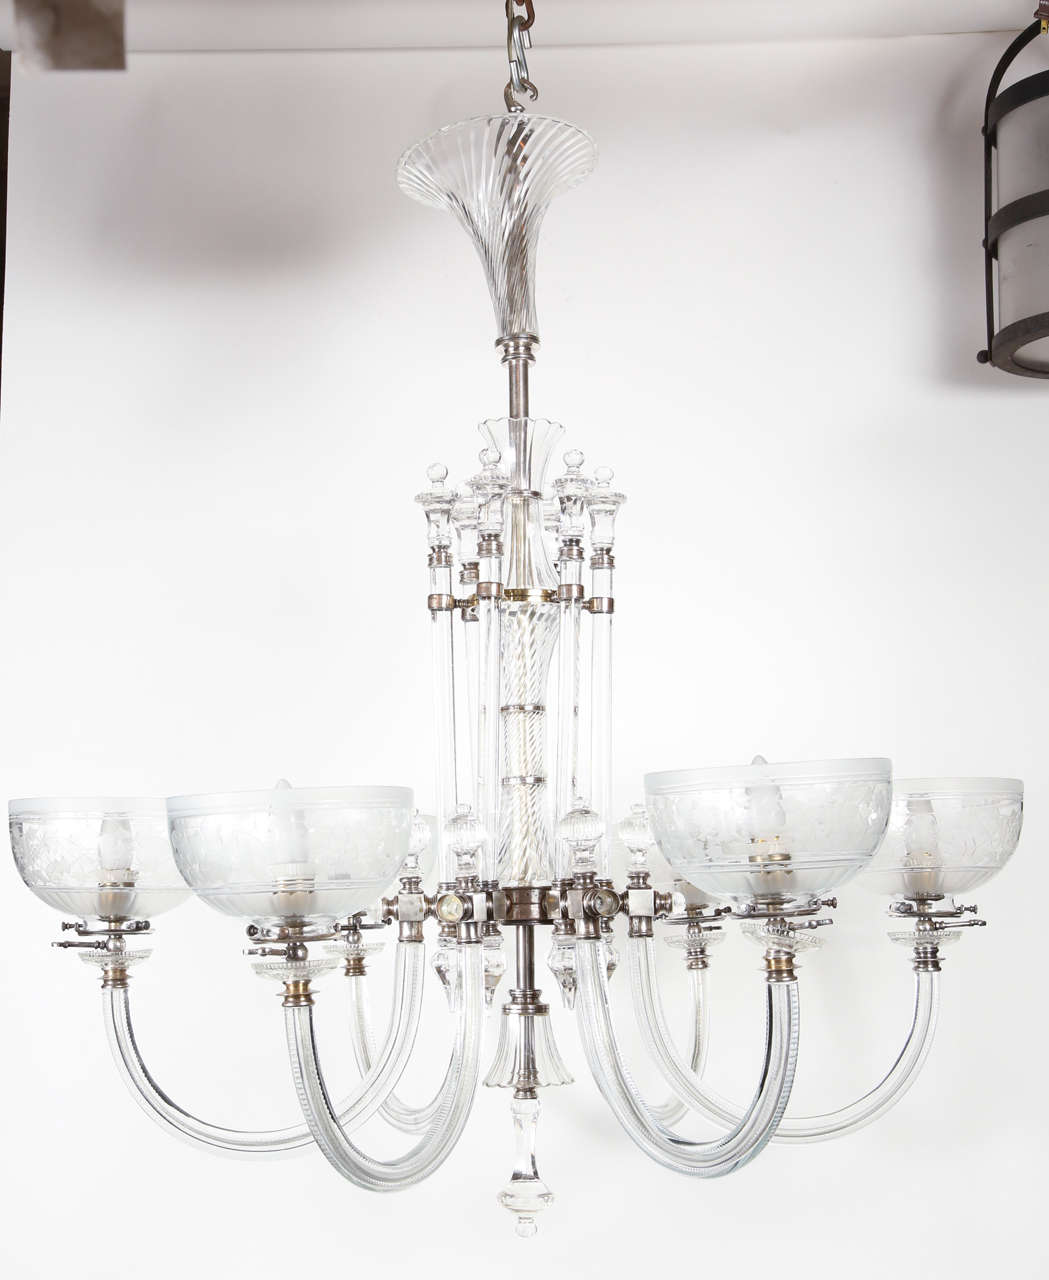 2003 Excellent Osler Gas Chandelier Replica with Six Lamps, Electrified 3